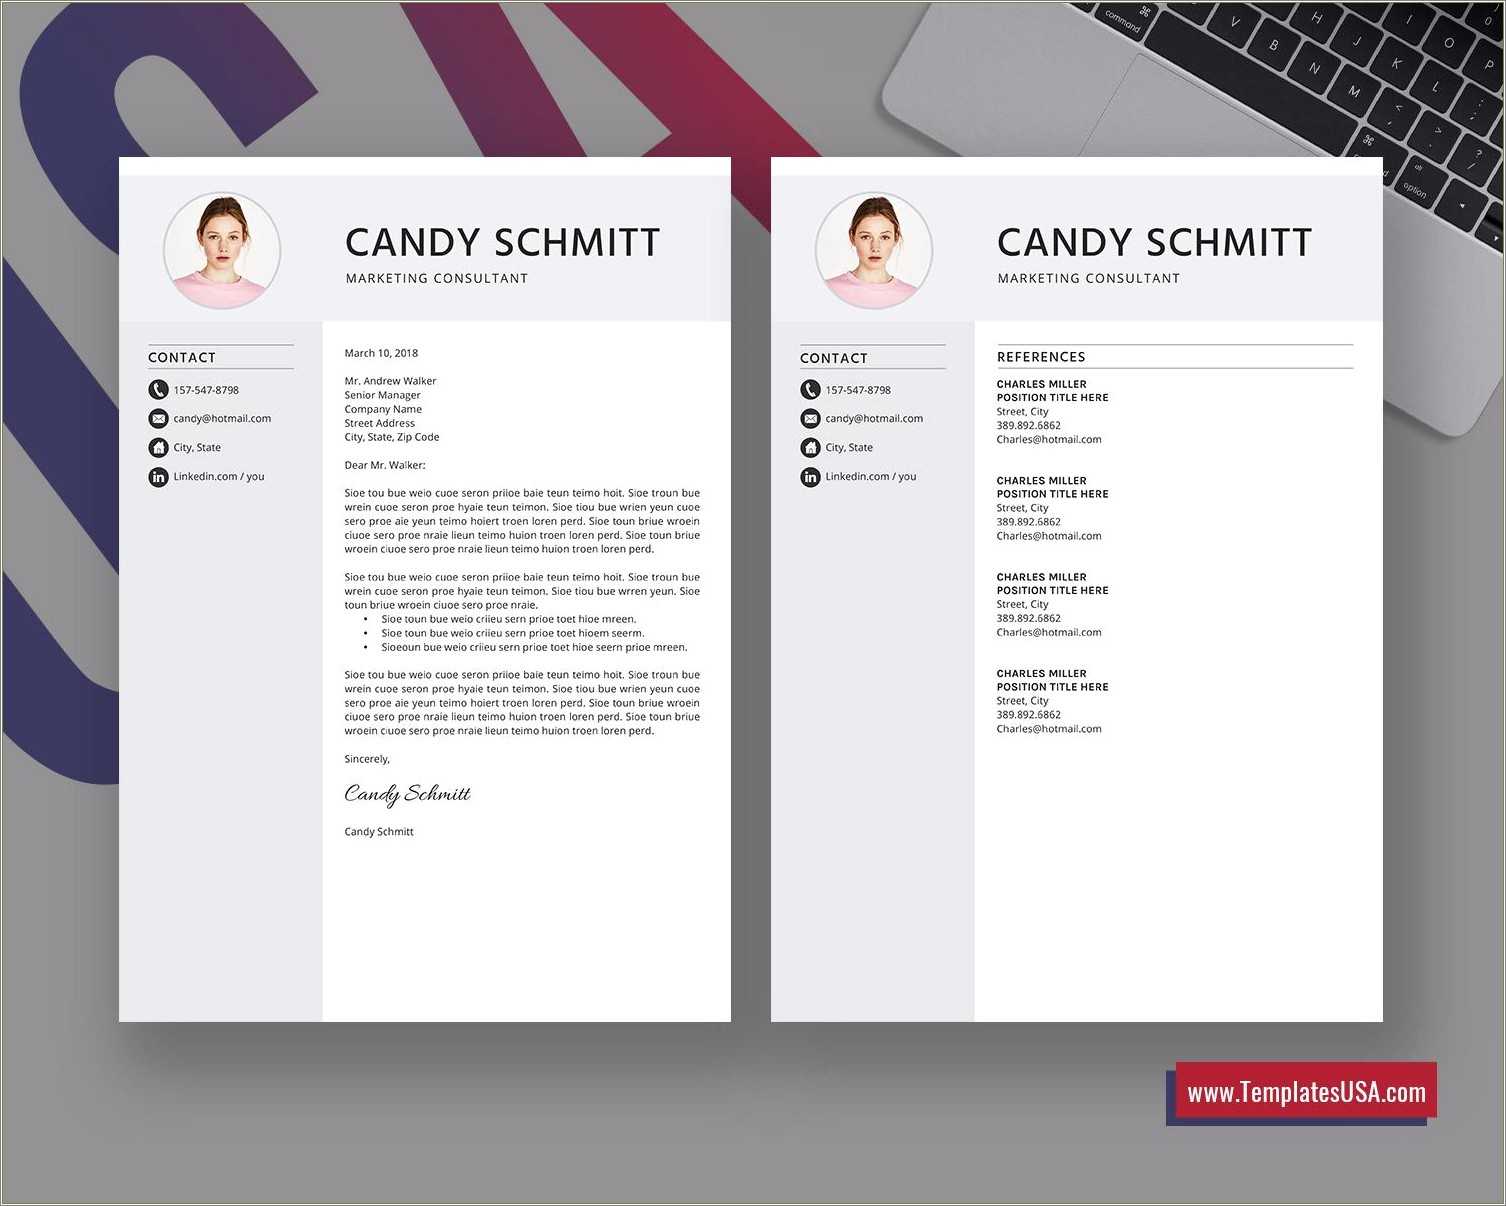 format-for-resume-on-microsoft-word-resume-example-gallery